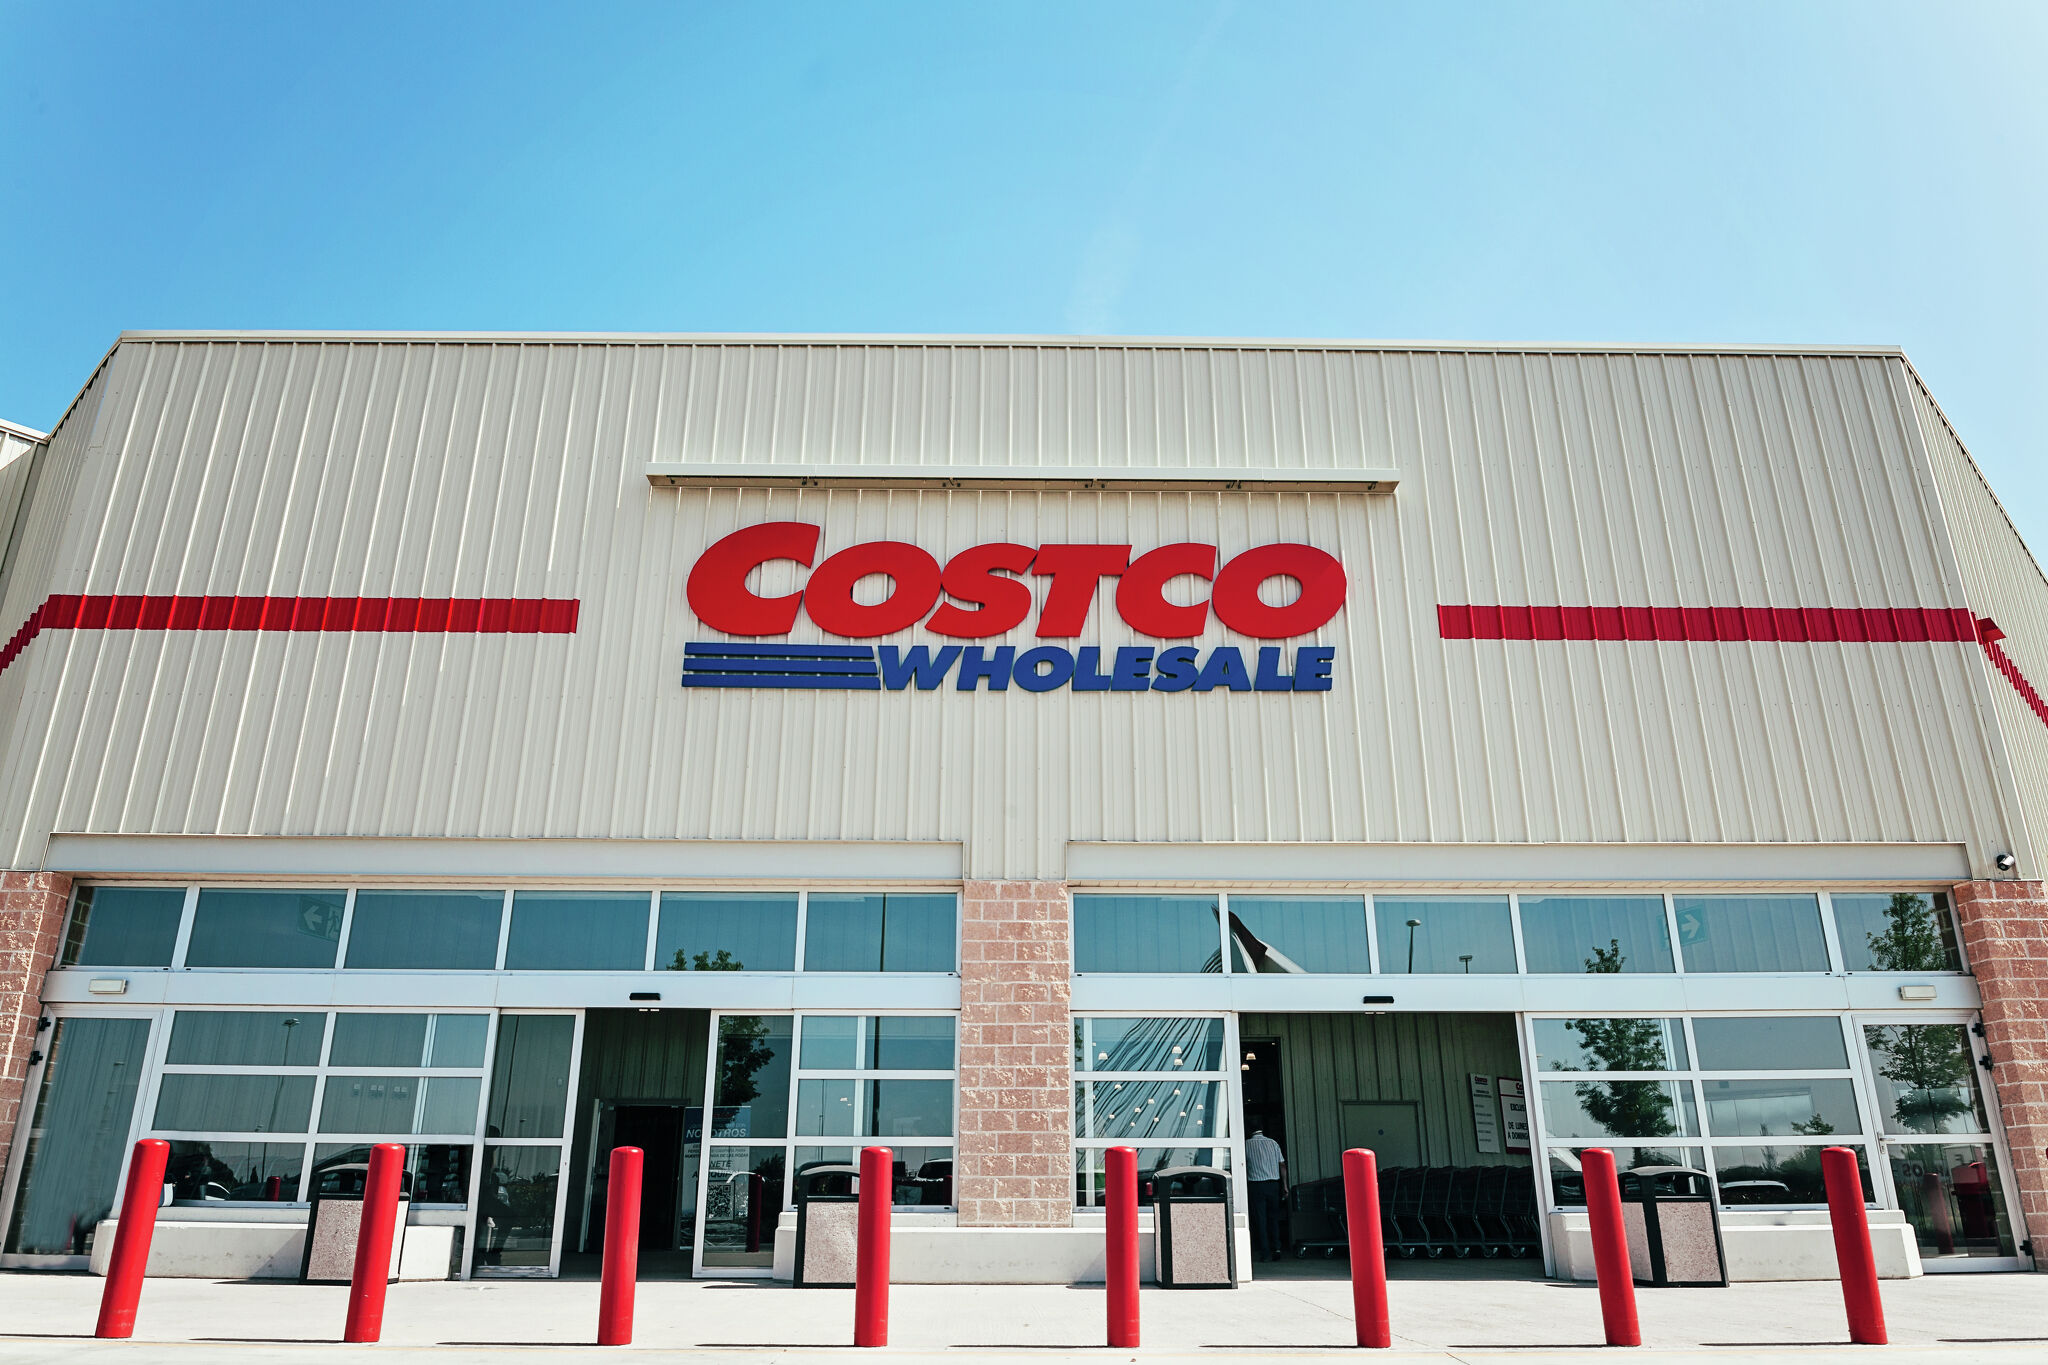 California Costco seen selling bags of produce as low as $1